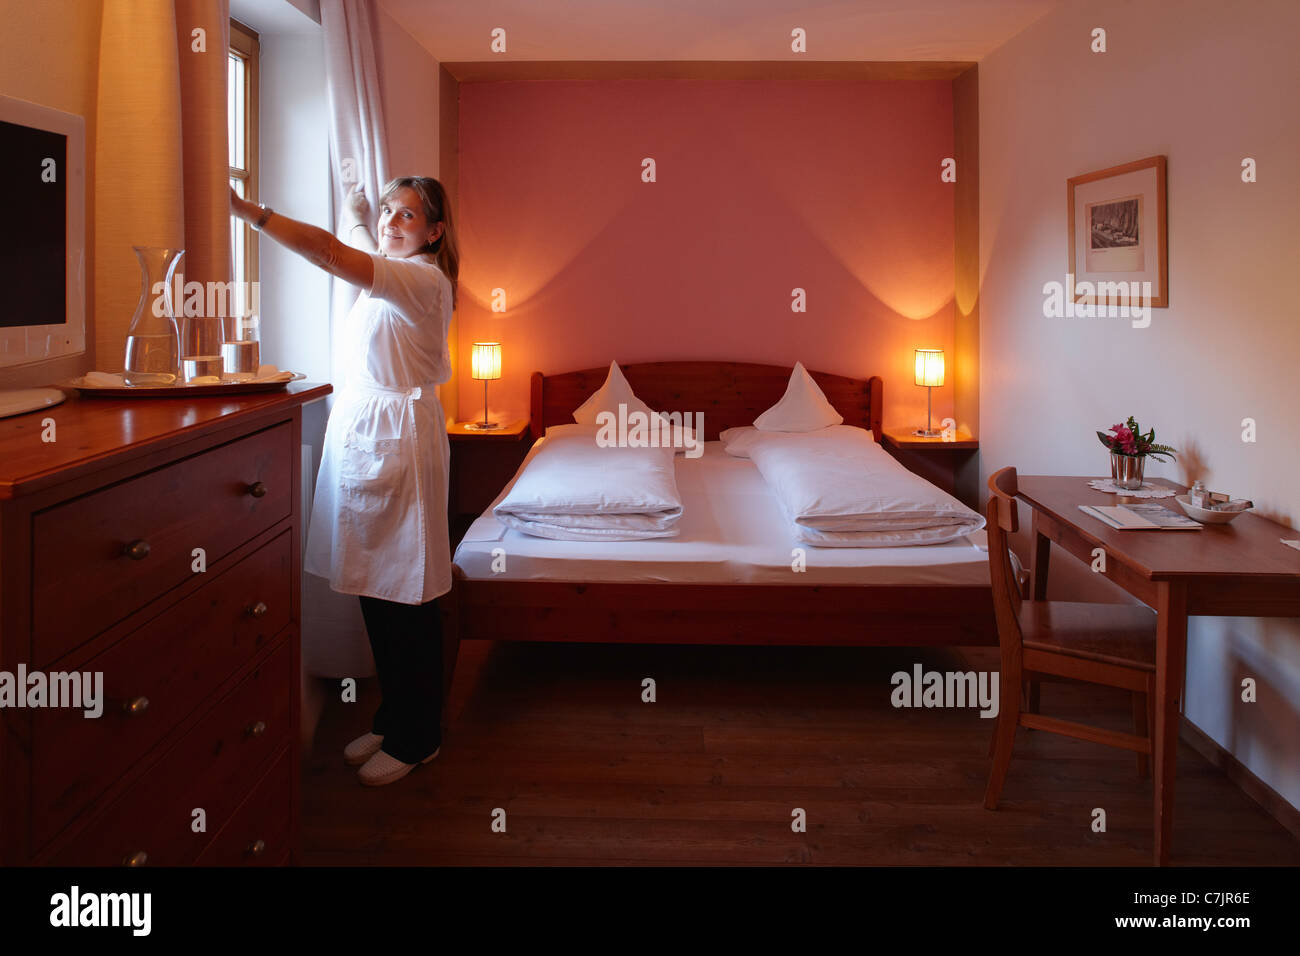 Maid cleaning hotel room Stock Photo